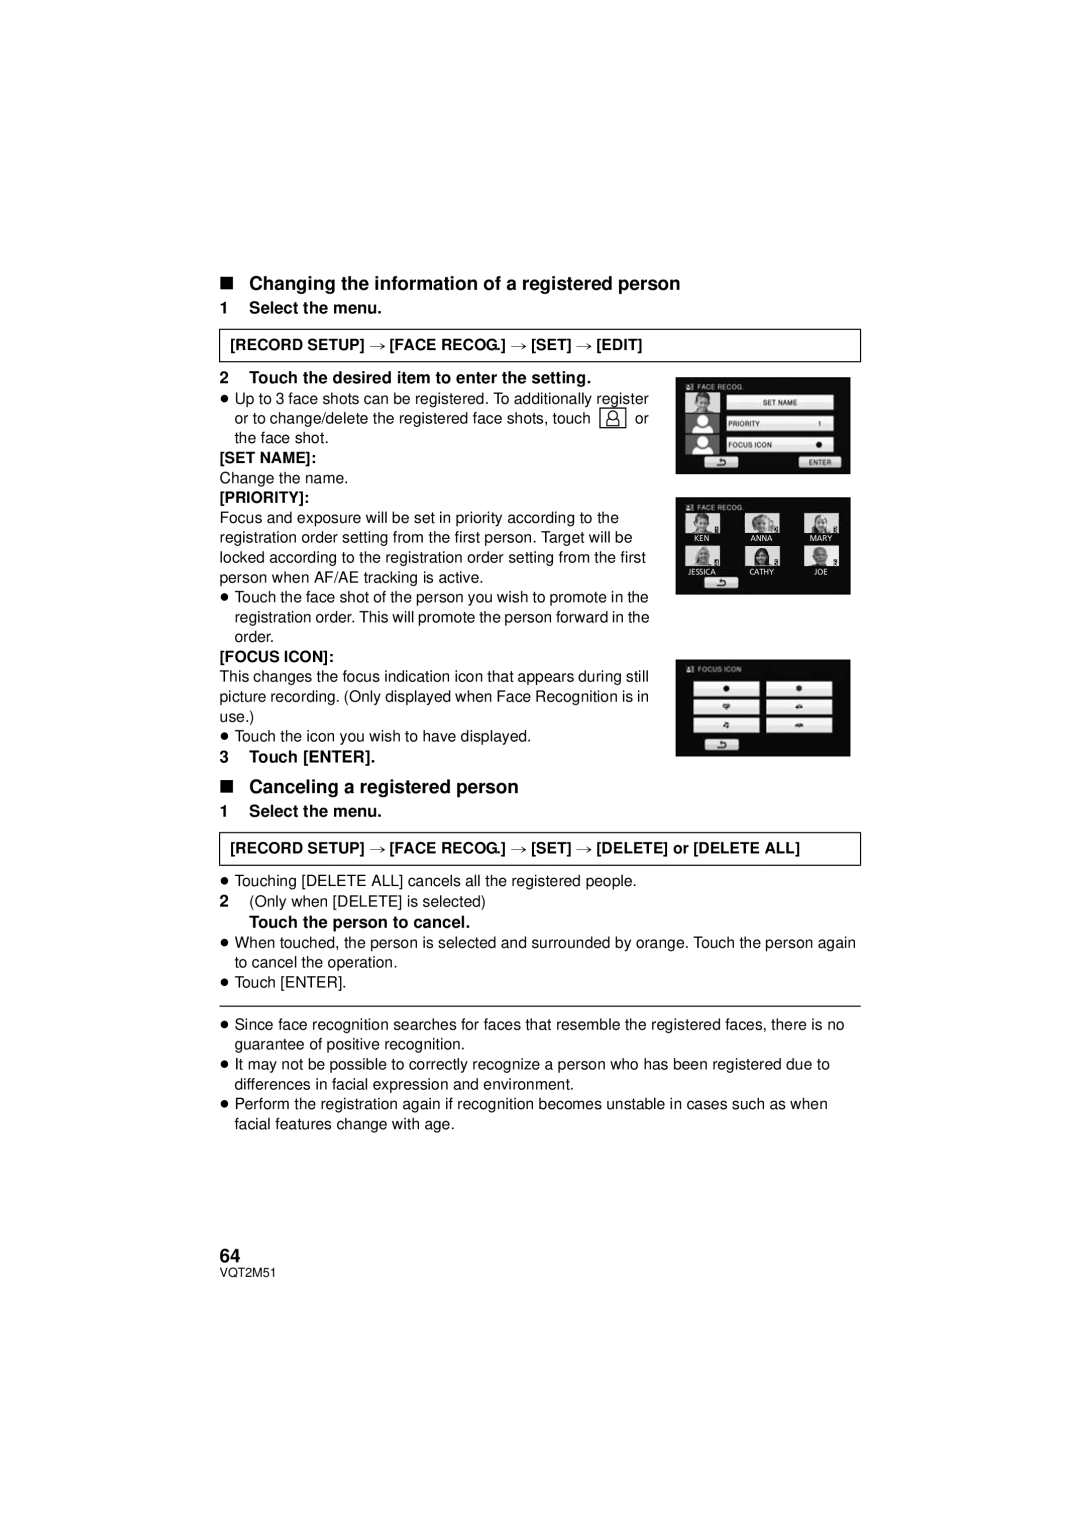 Panasonic HDC-SD60P/PC Changing the information of a registered person, ∫ Canceling a registered person, Select the menu 